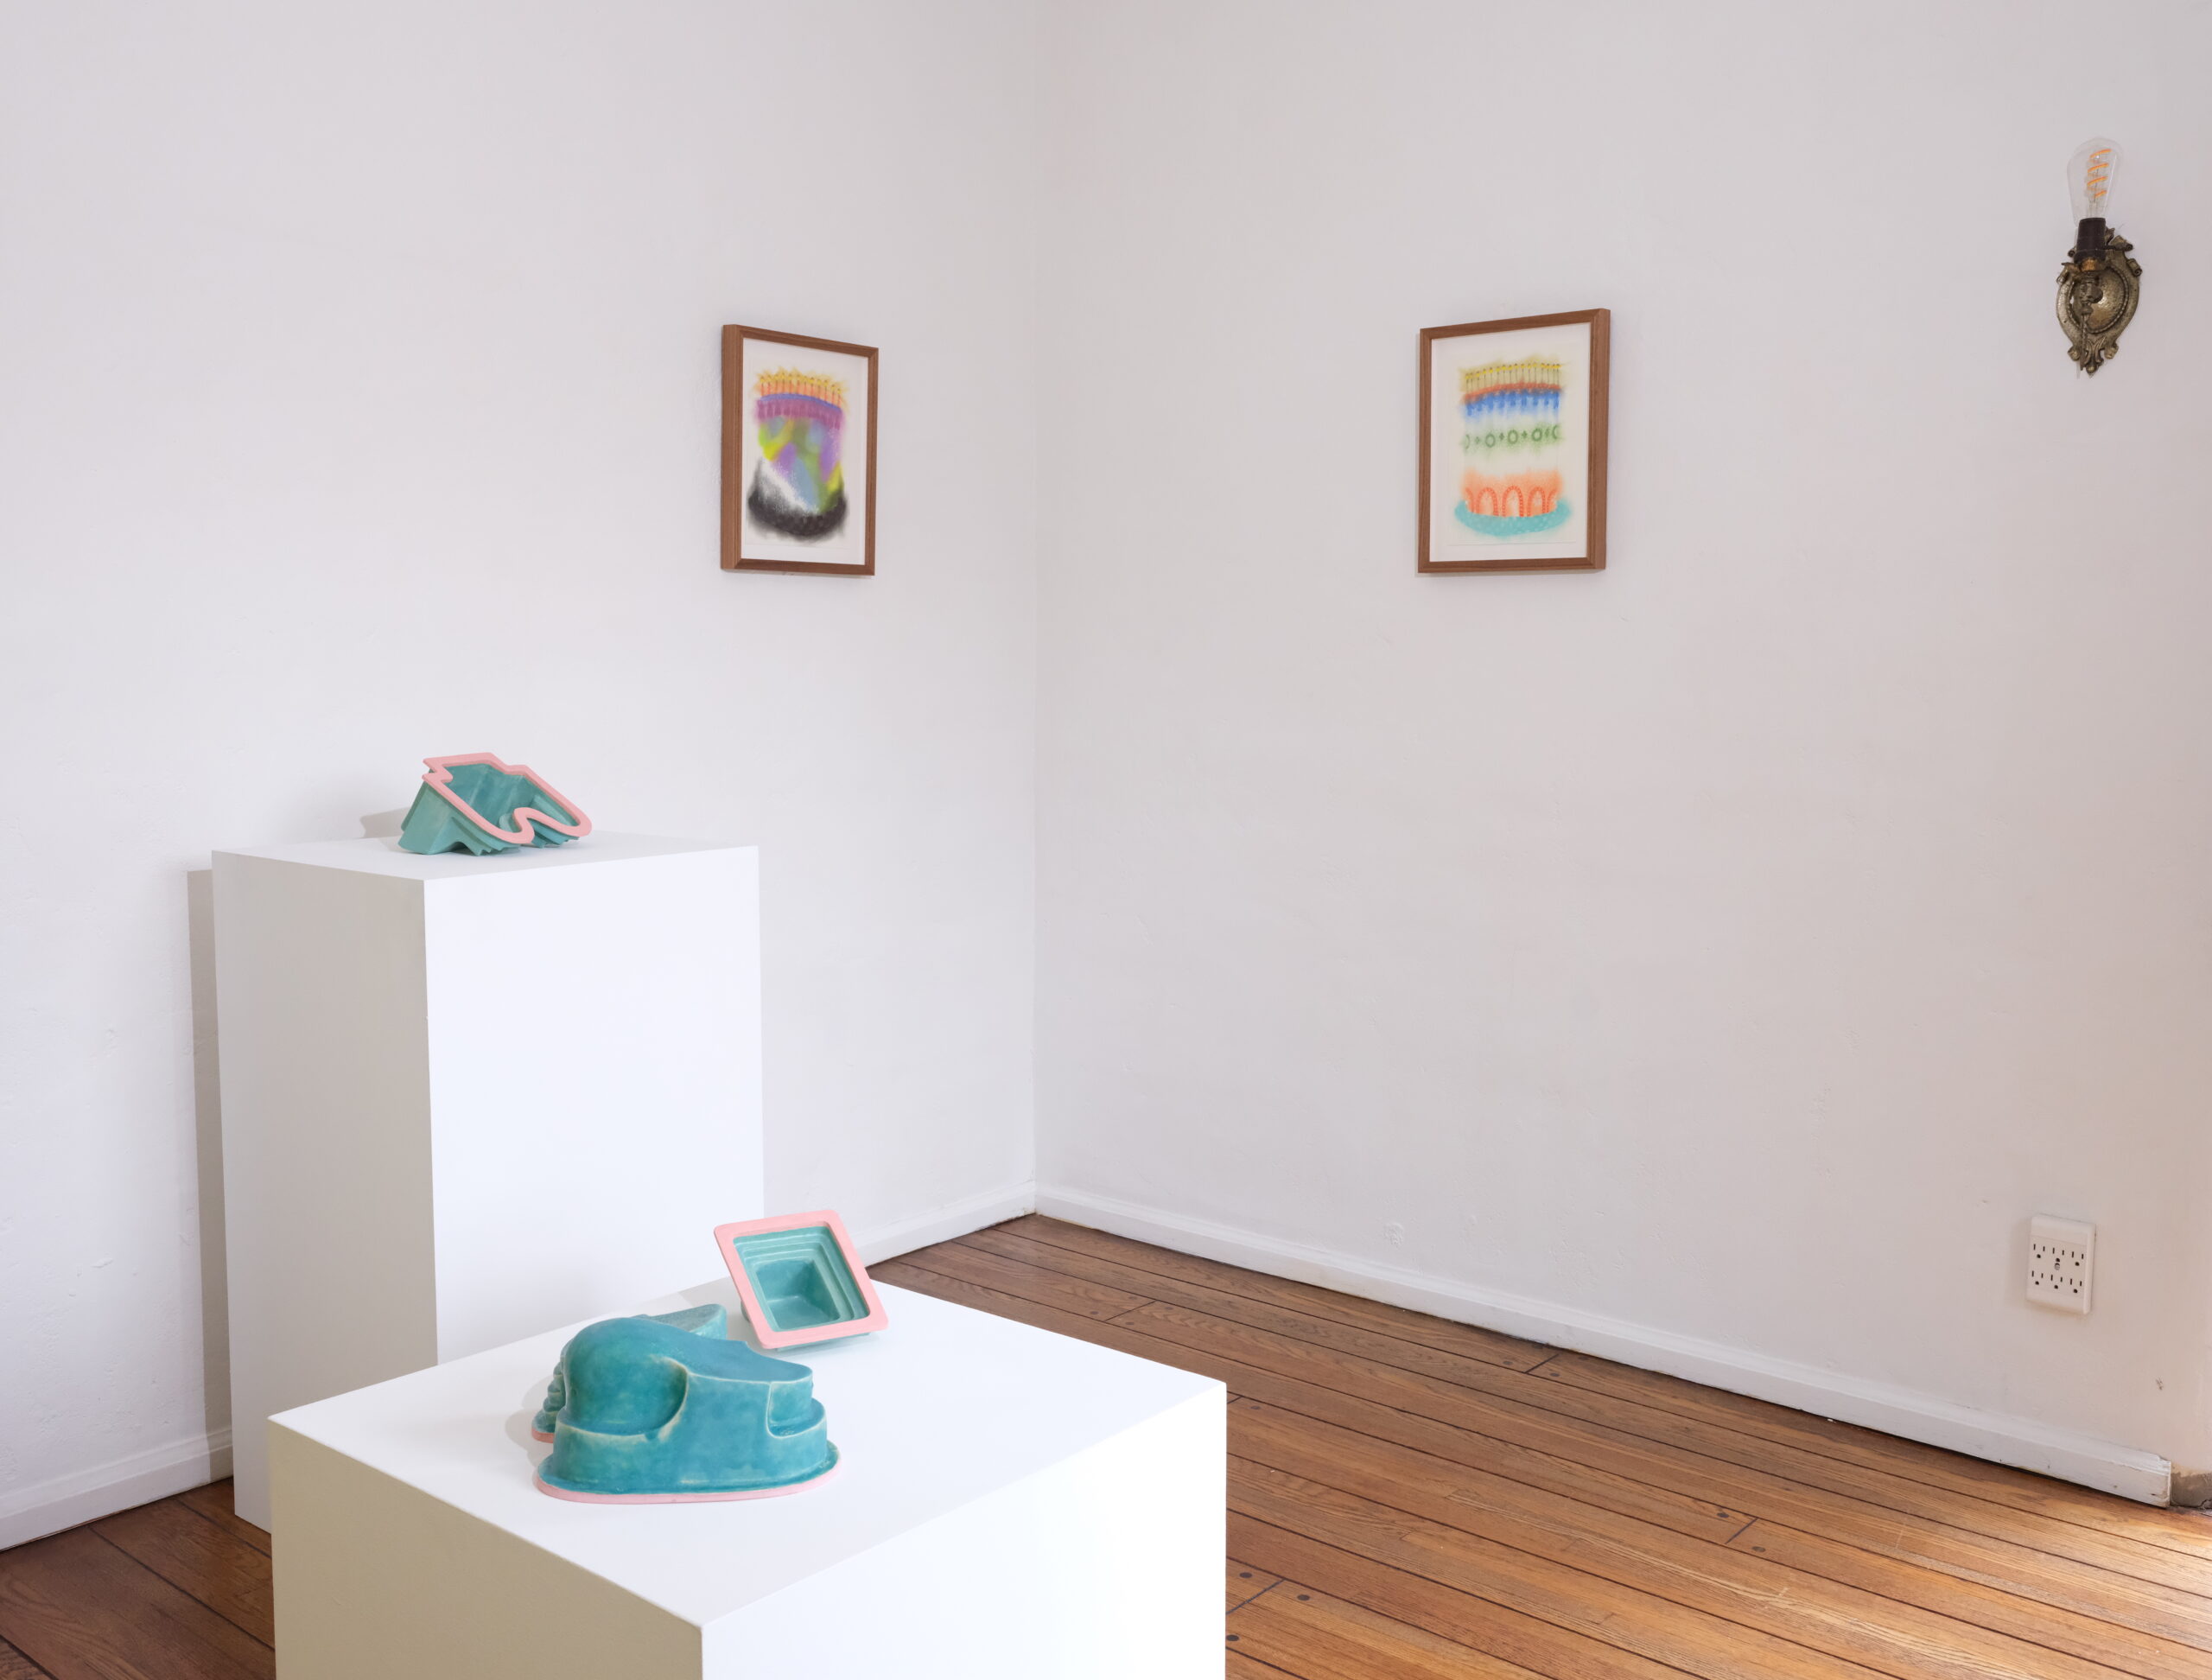 Installation view, Pepper Tree, works by Rocío Olivares and Edwin Arzeta